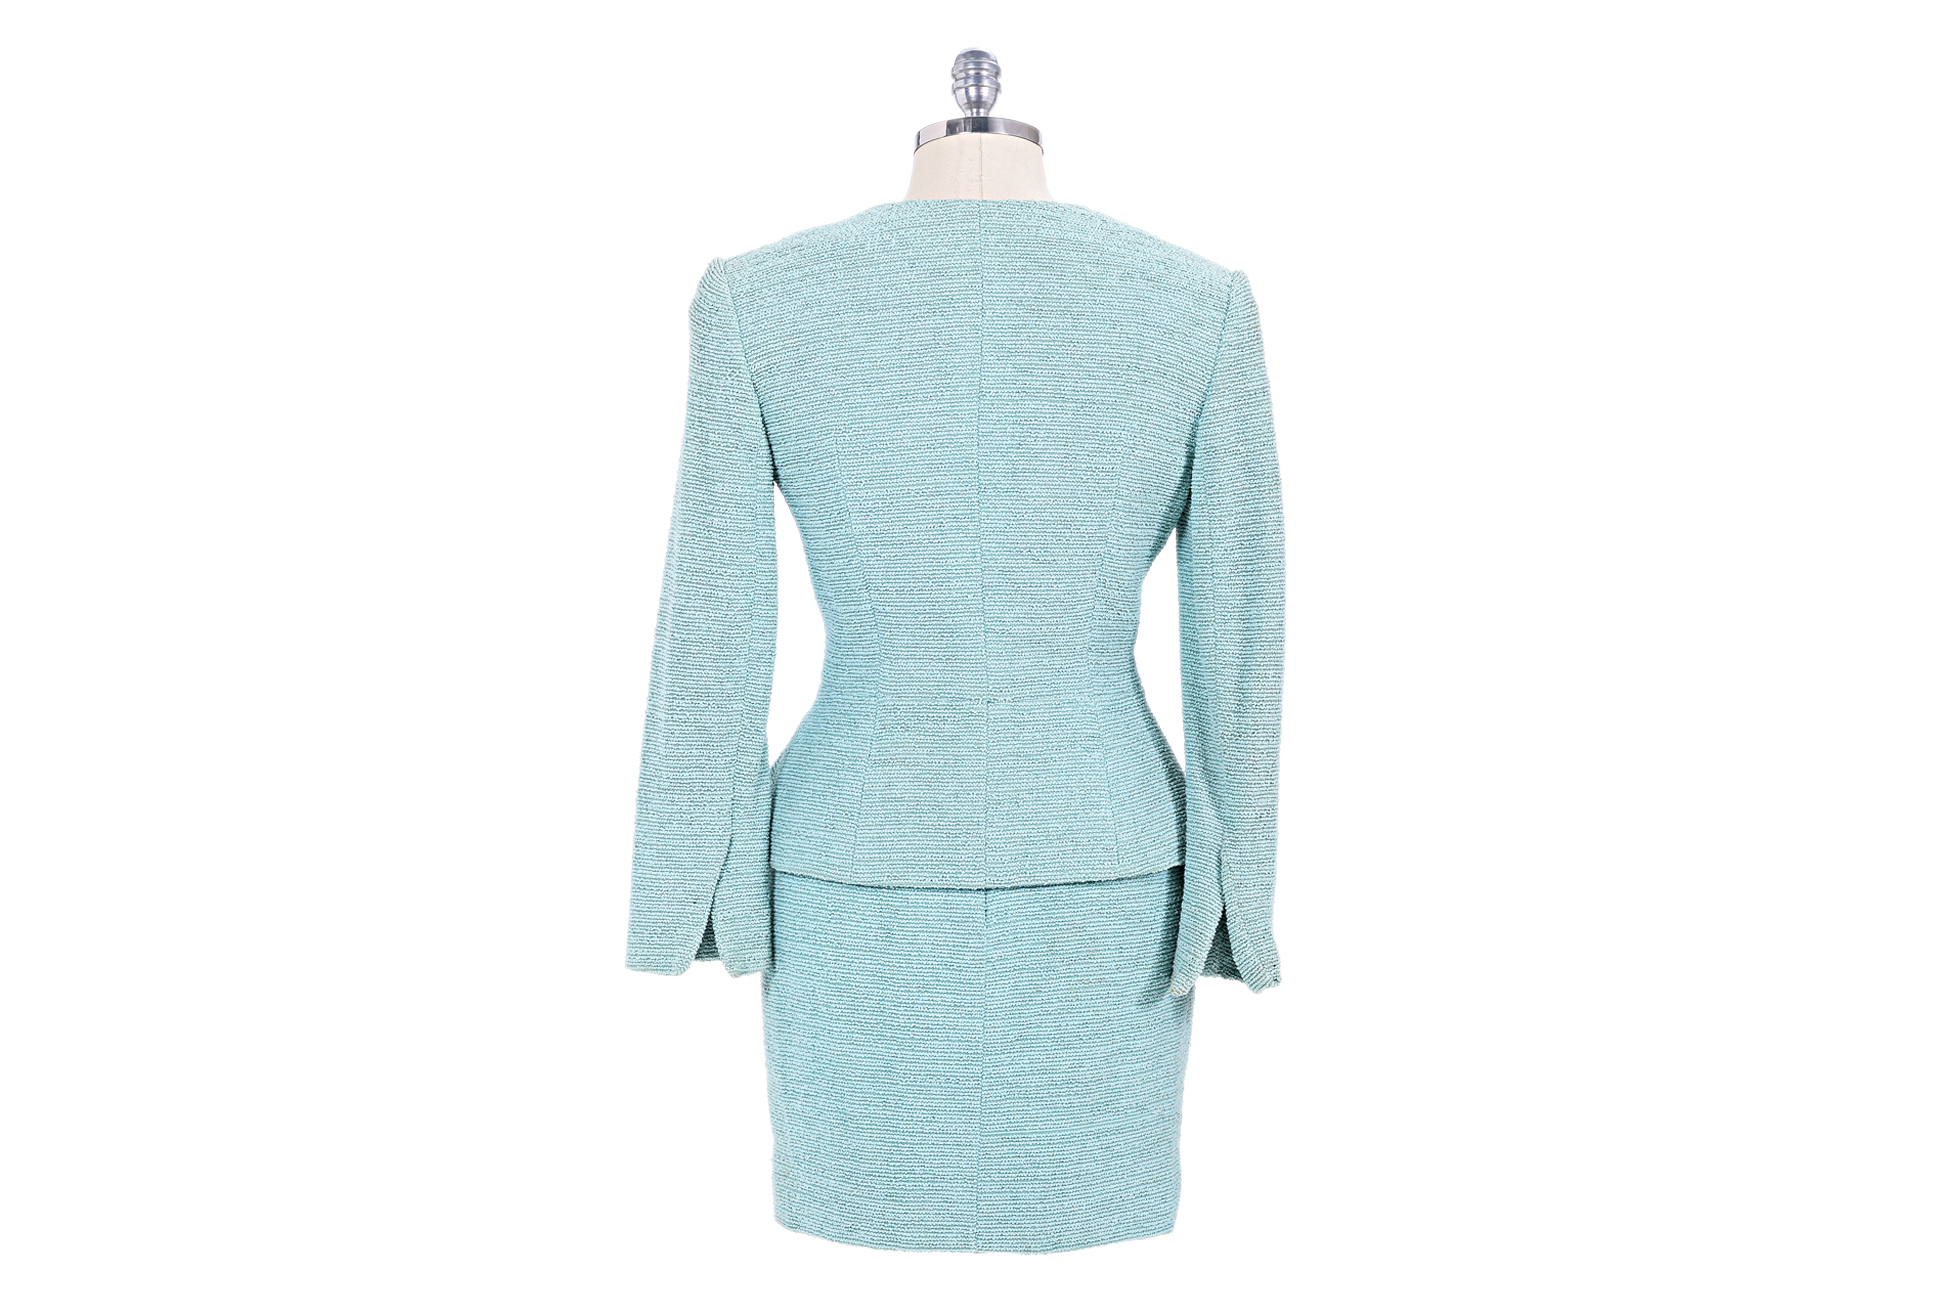 A CHRISTIAN DIOR TWO-PIECE SKIRT SUIT - Image 2 of 2